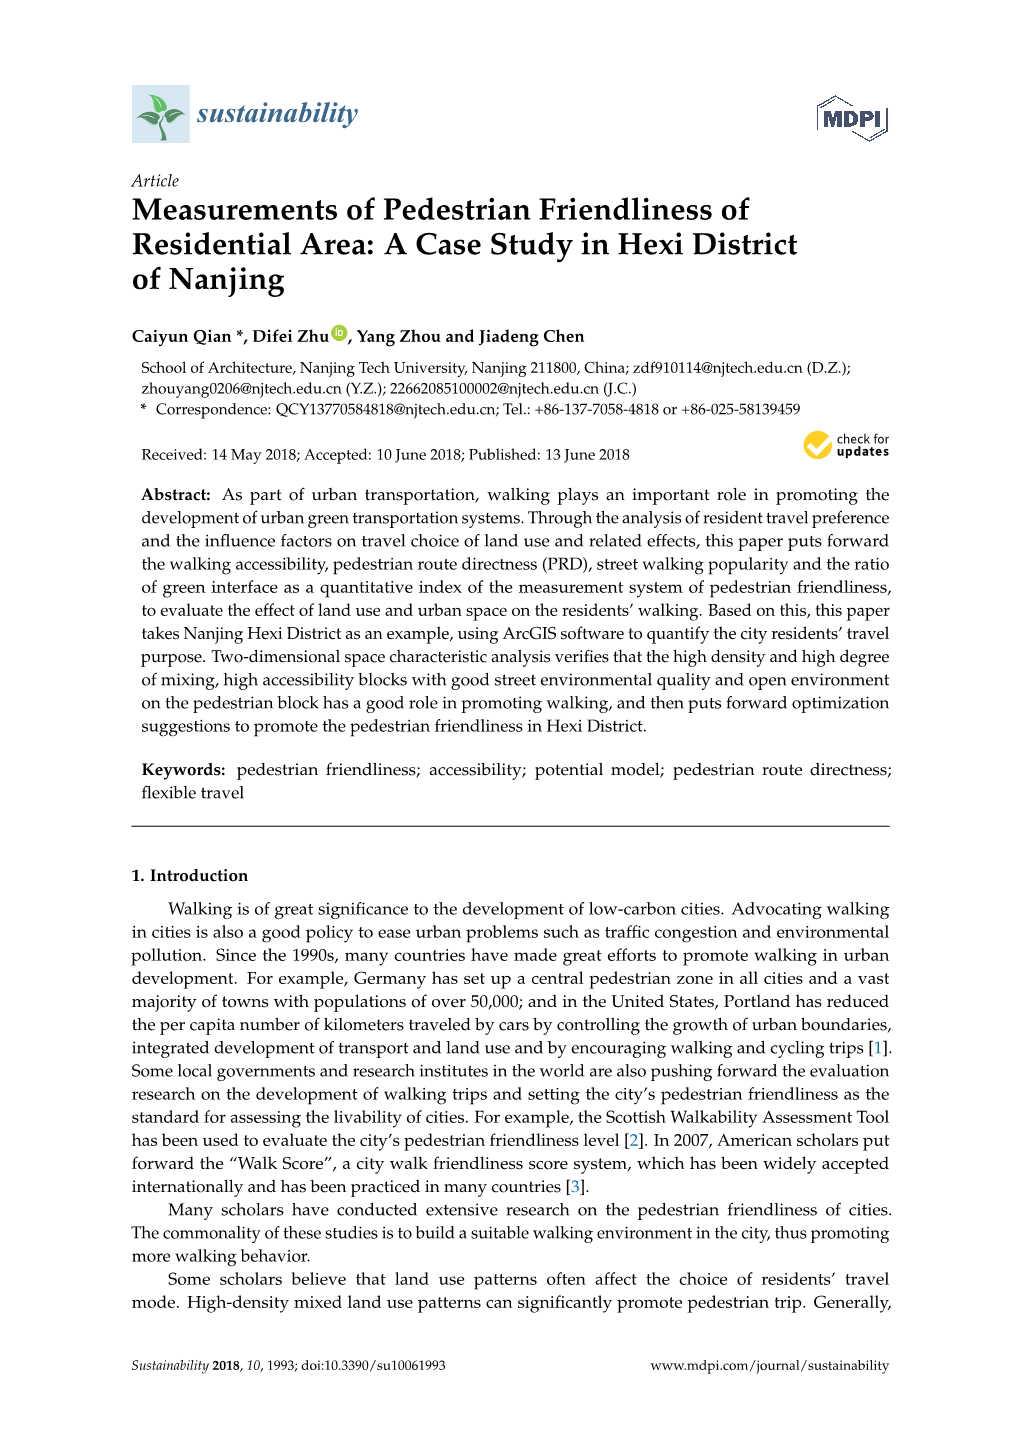 Measurements of Pedestrian Friendliness of Residential Area: a Case Study in Hexi District of Nanjing